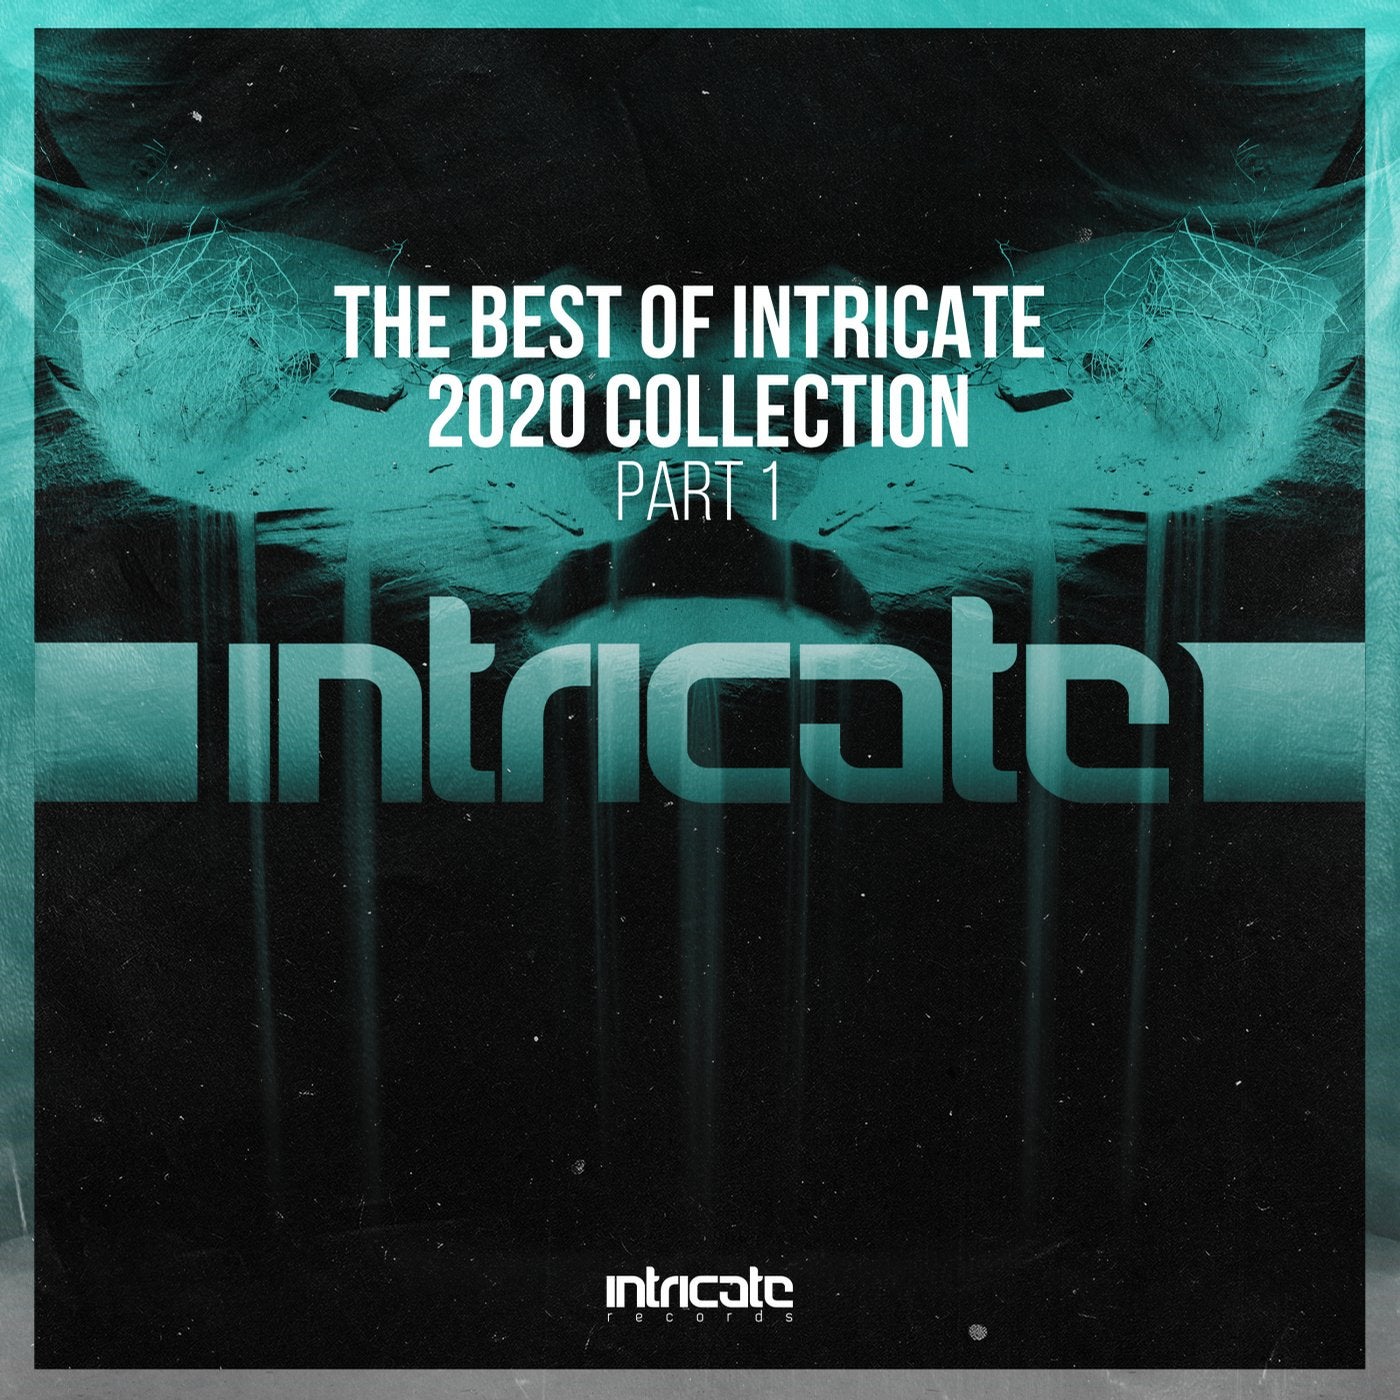 The Best of Intricate 2020 Collection, Pt. 1